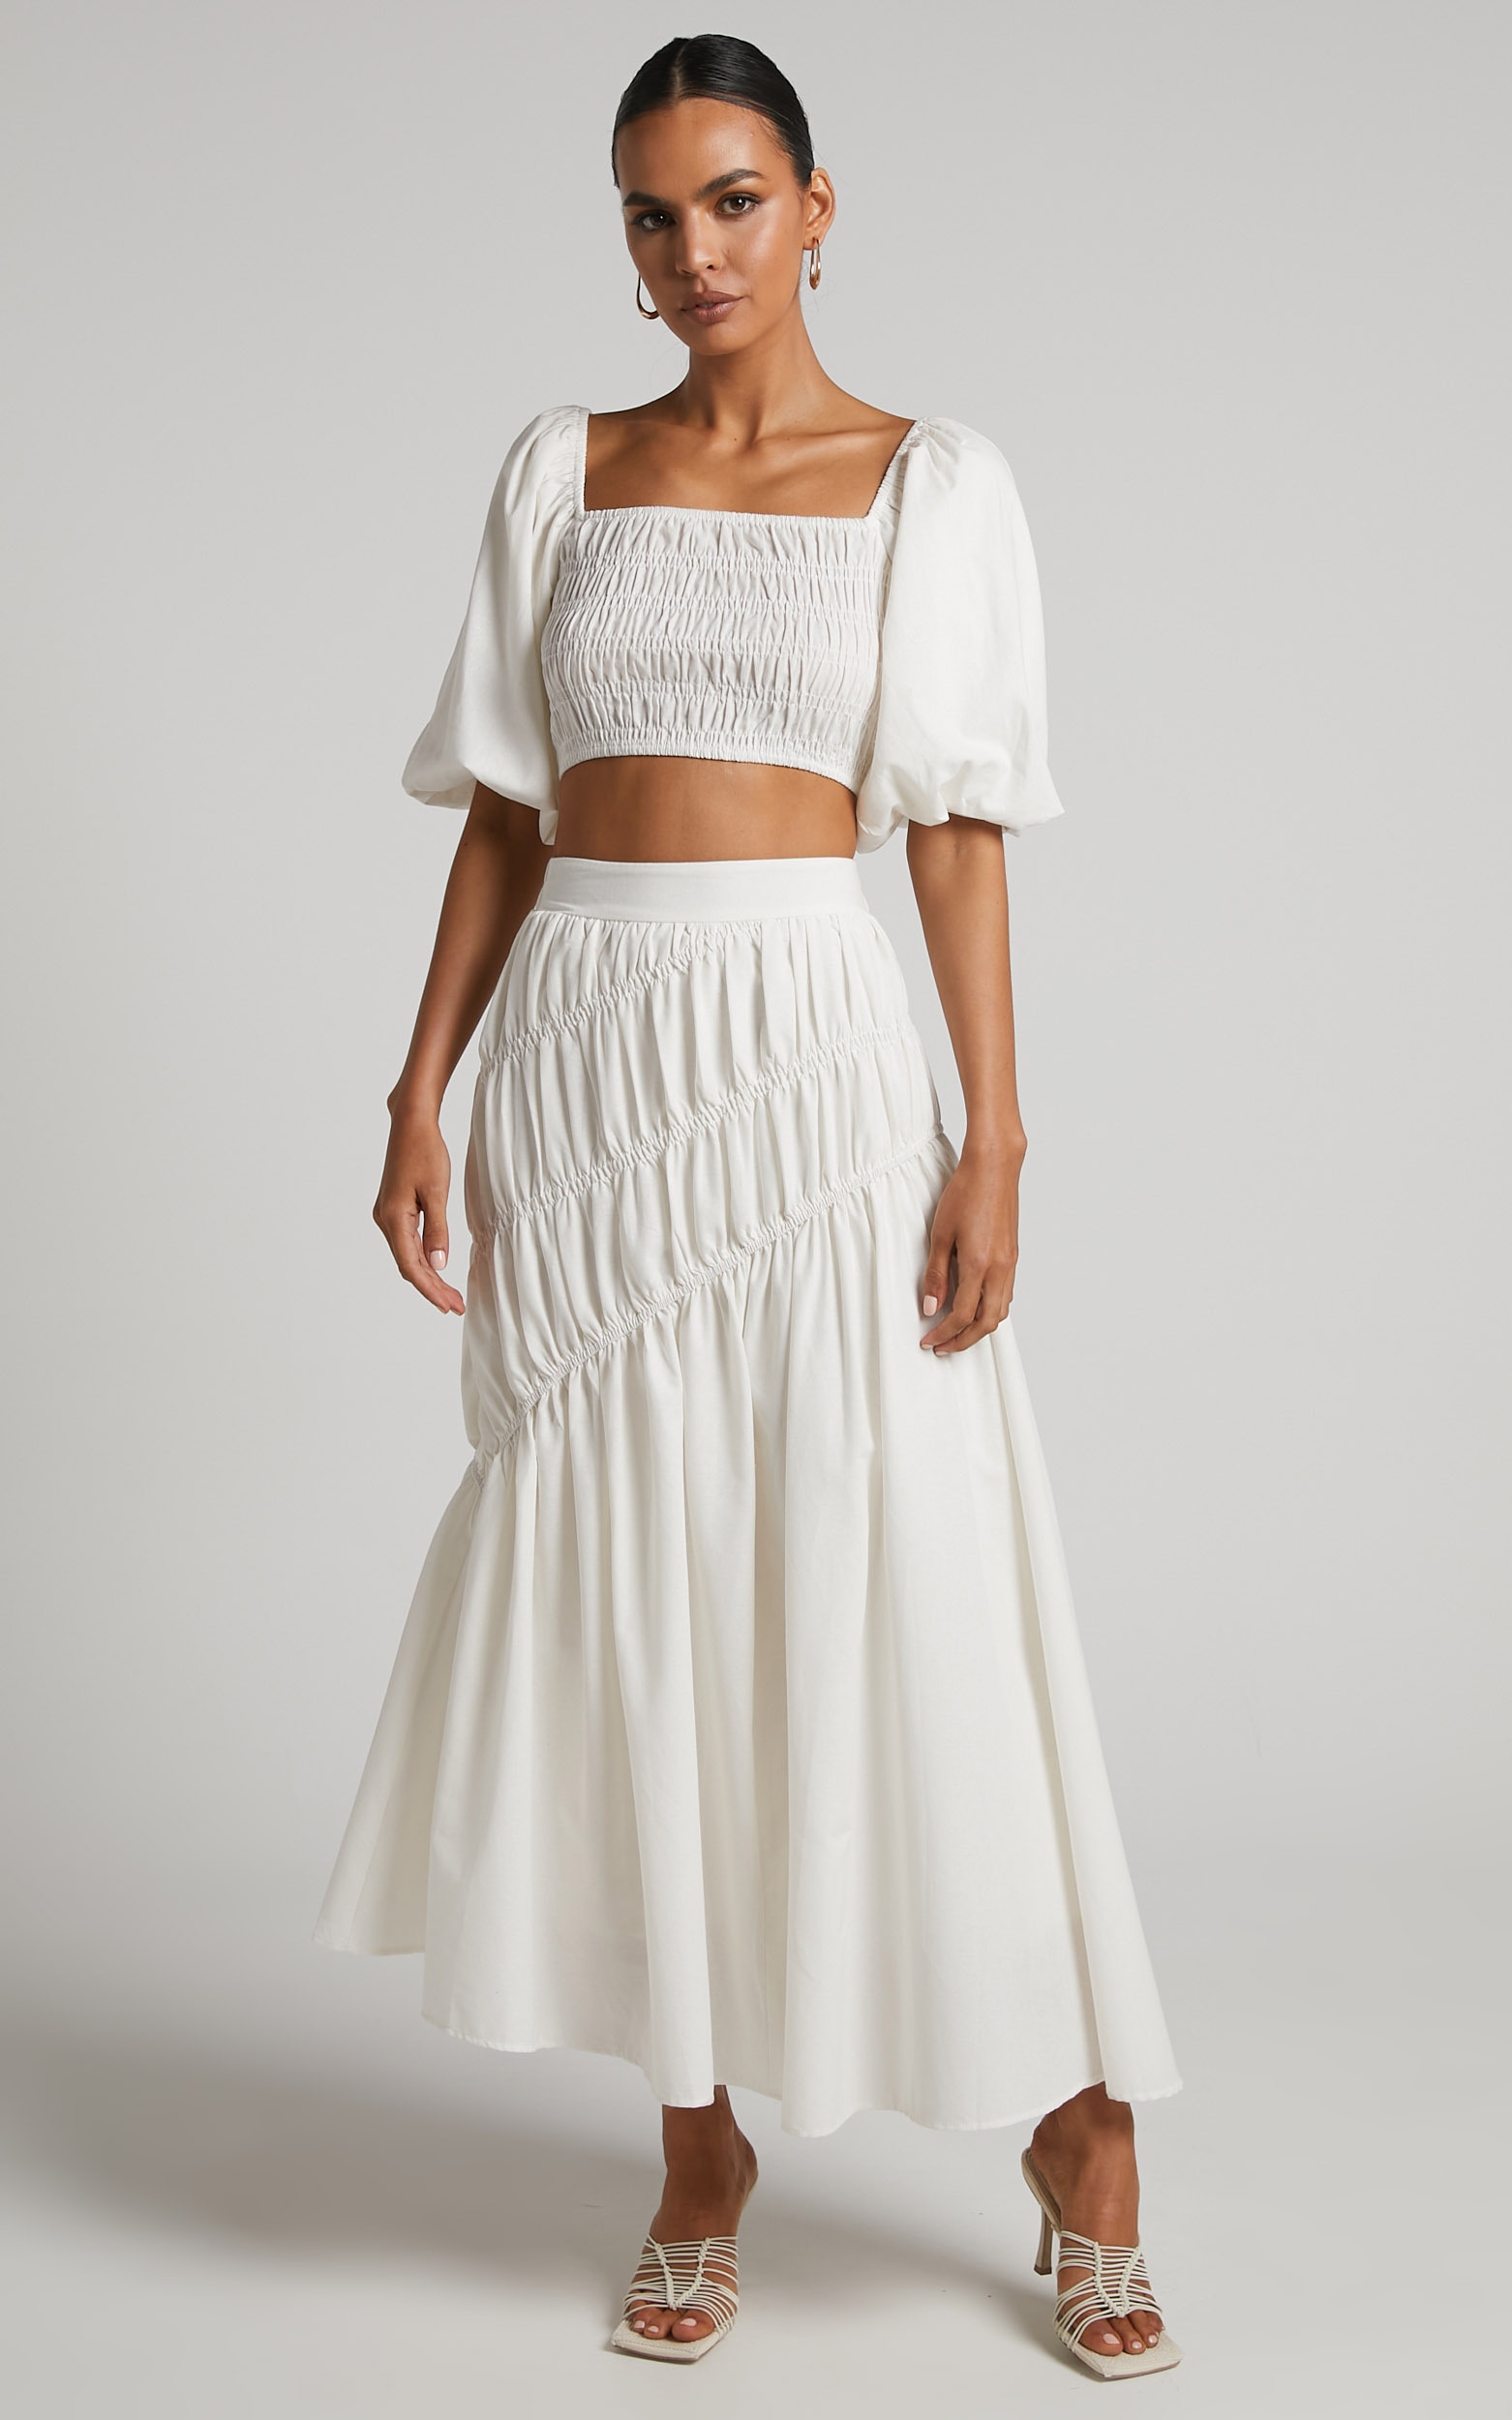 Elina Maxi Skirt - Linen Shirred Tiered Skirt in White - 06, WHT1, hi-res image number null